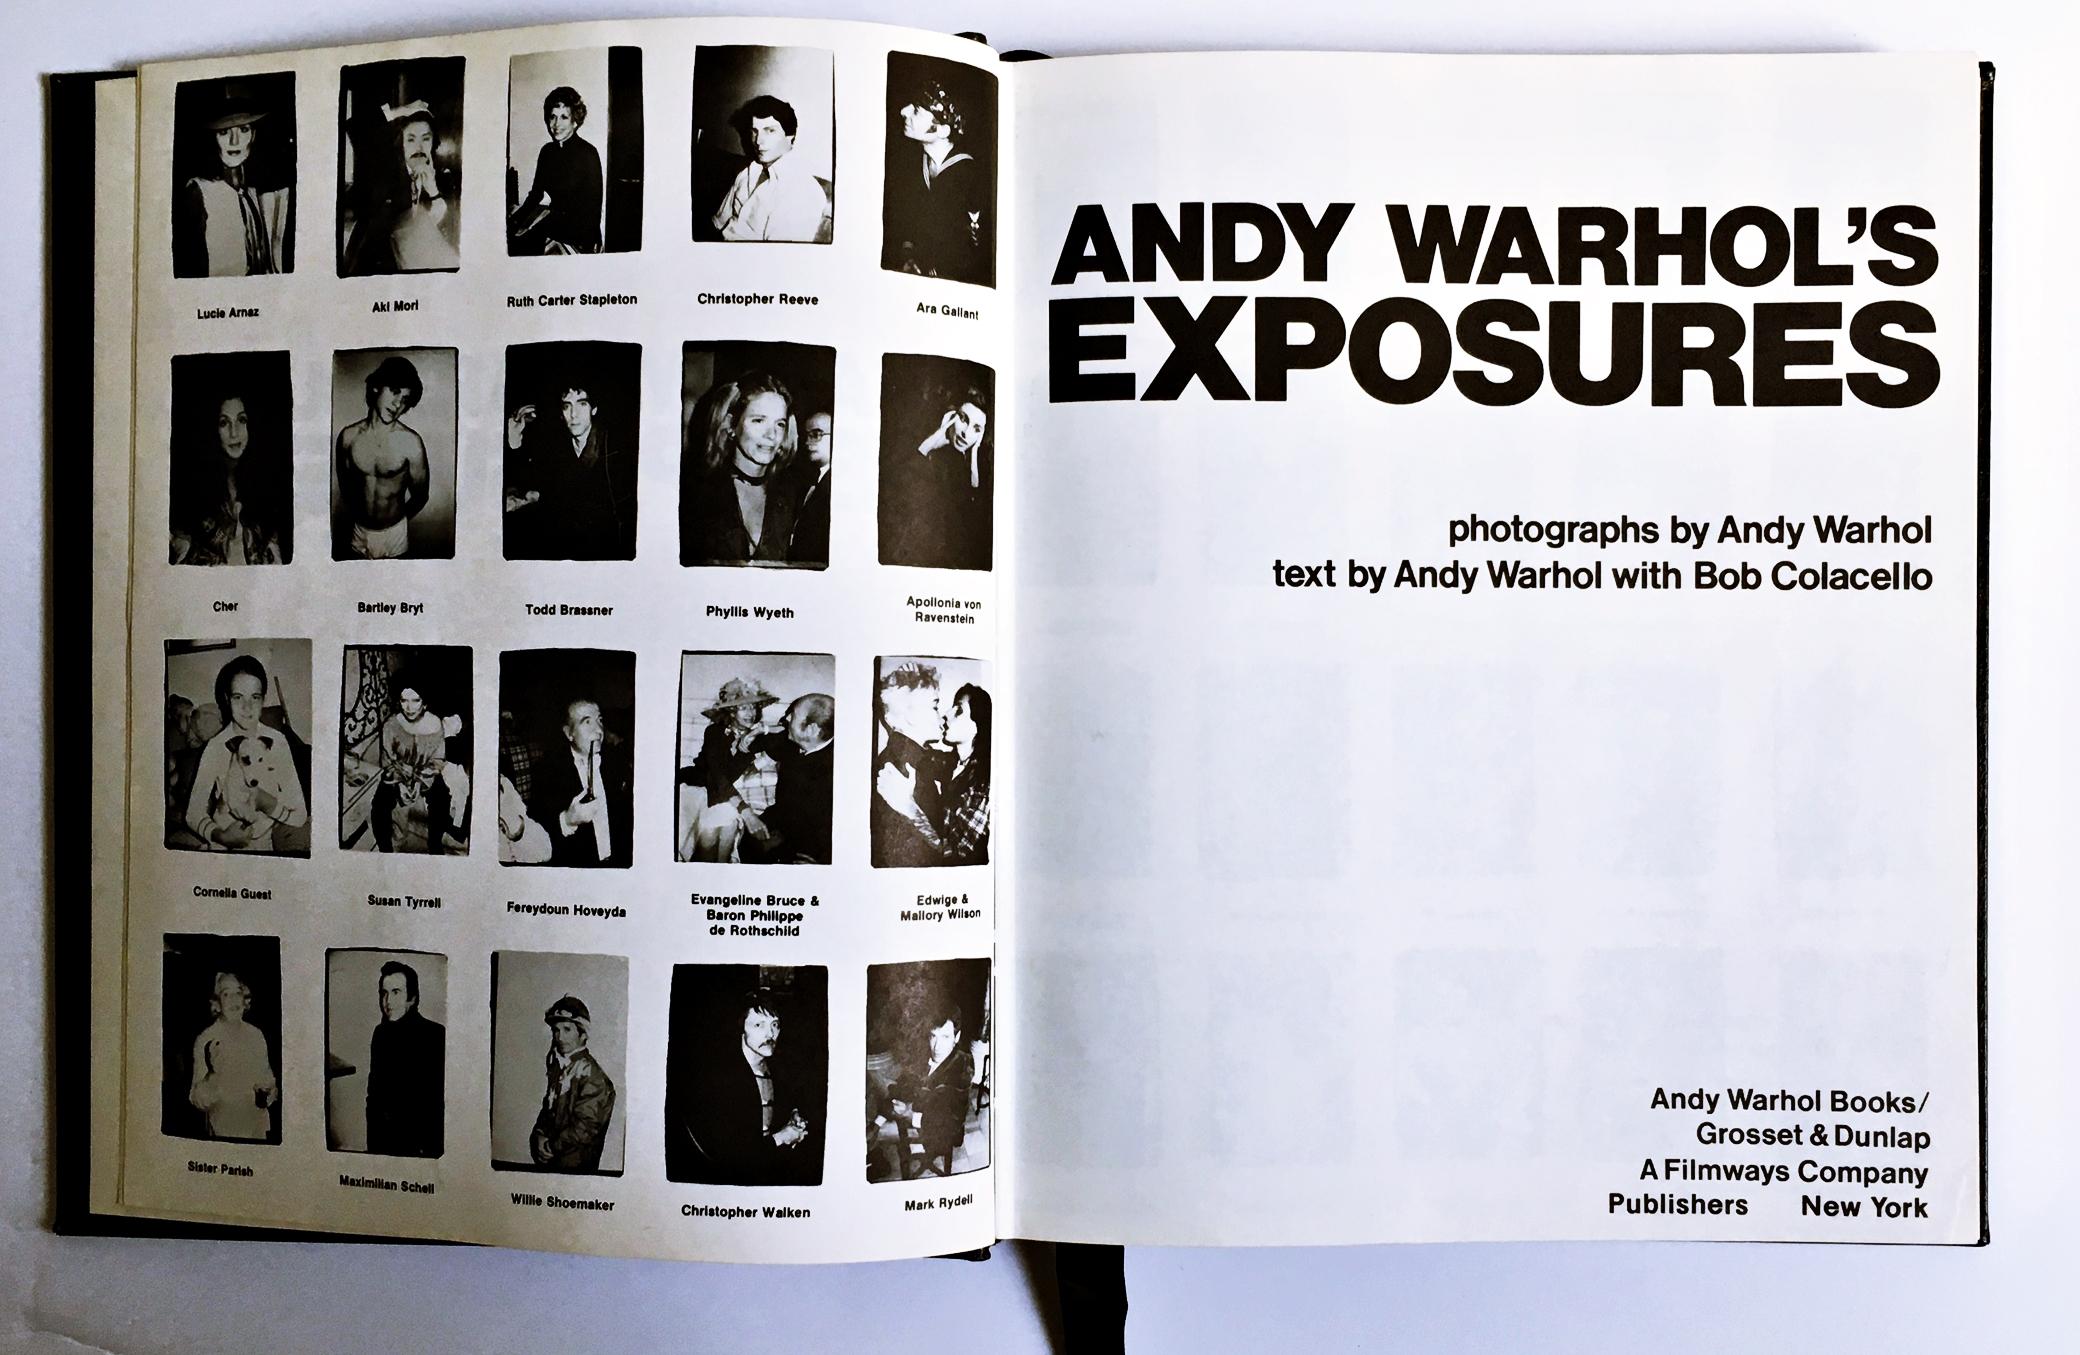 Andy Warhol
Deluxe Collectors' Edition of Exposures (Hand Signed and Numbered), 1979
Hardcover Monograph in leather with gilt edge and stamped in gilt. 
Hand signed by Andy Warhol on the First Front End Page. Numbered. Original, official COA hand